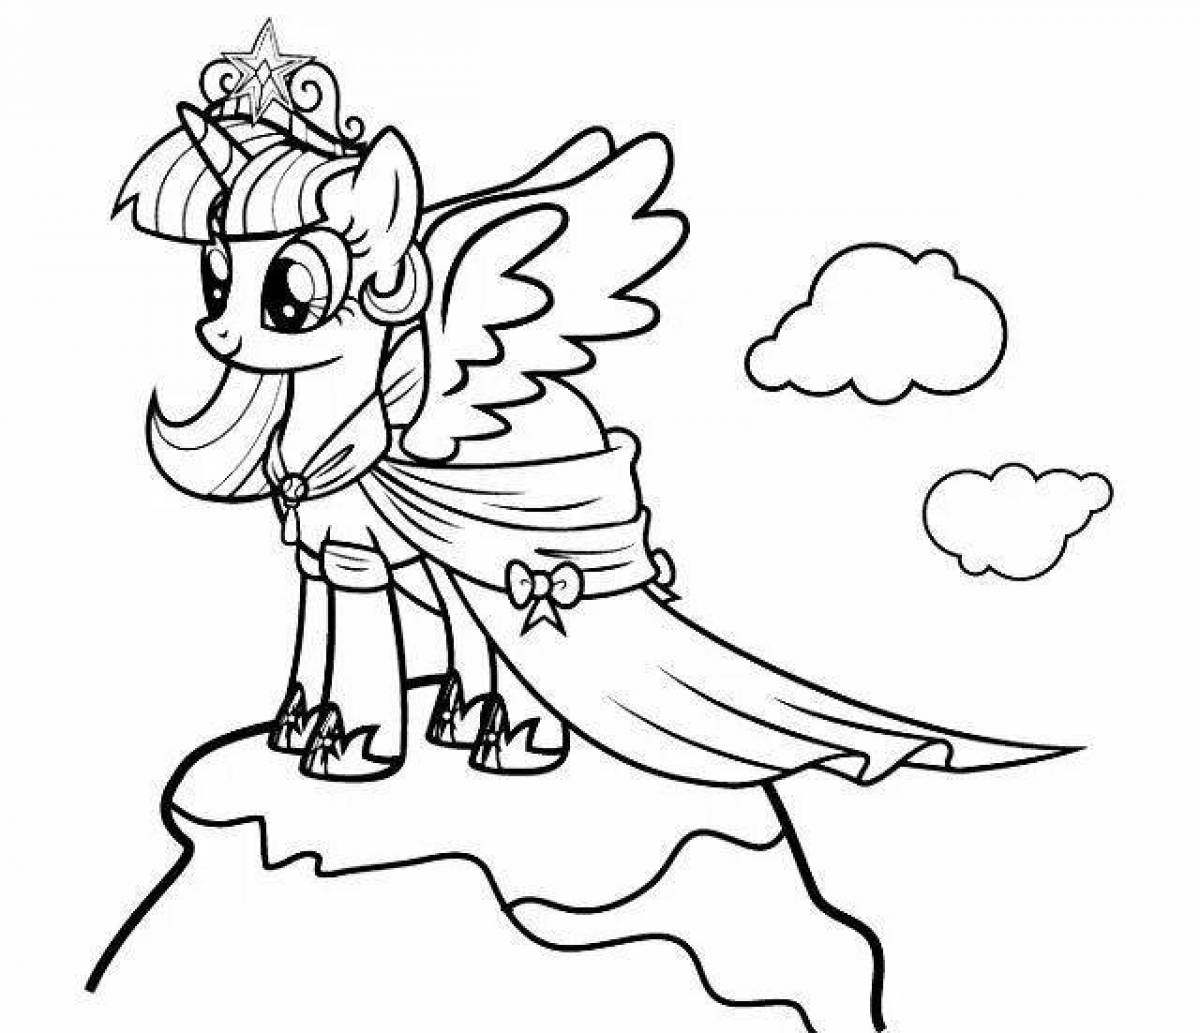 Awesome pony sleigh coloring page